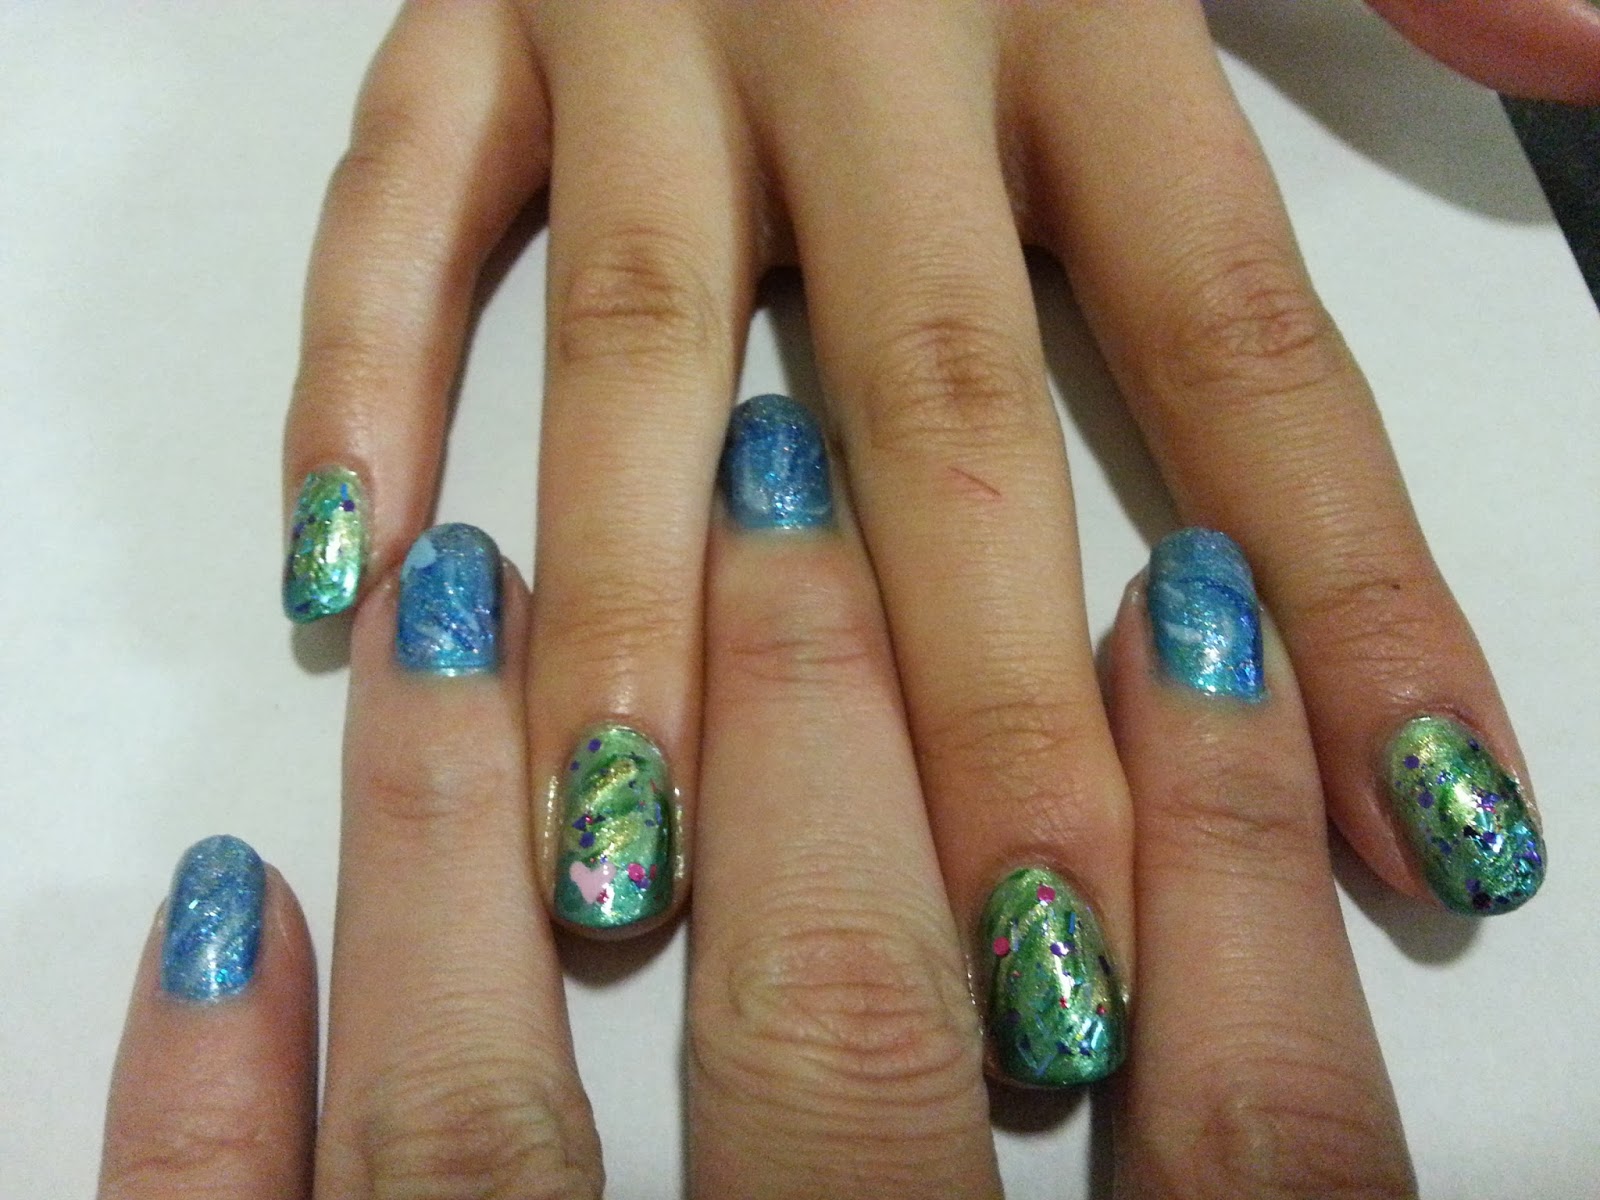 4. "Dailymotion Nail Art Tutorial featuring Elsa from Frozen" - wide 8